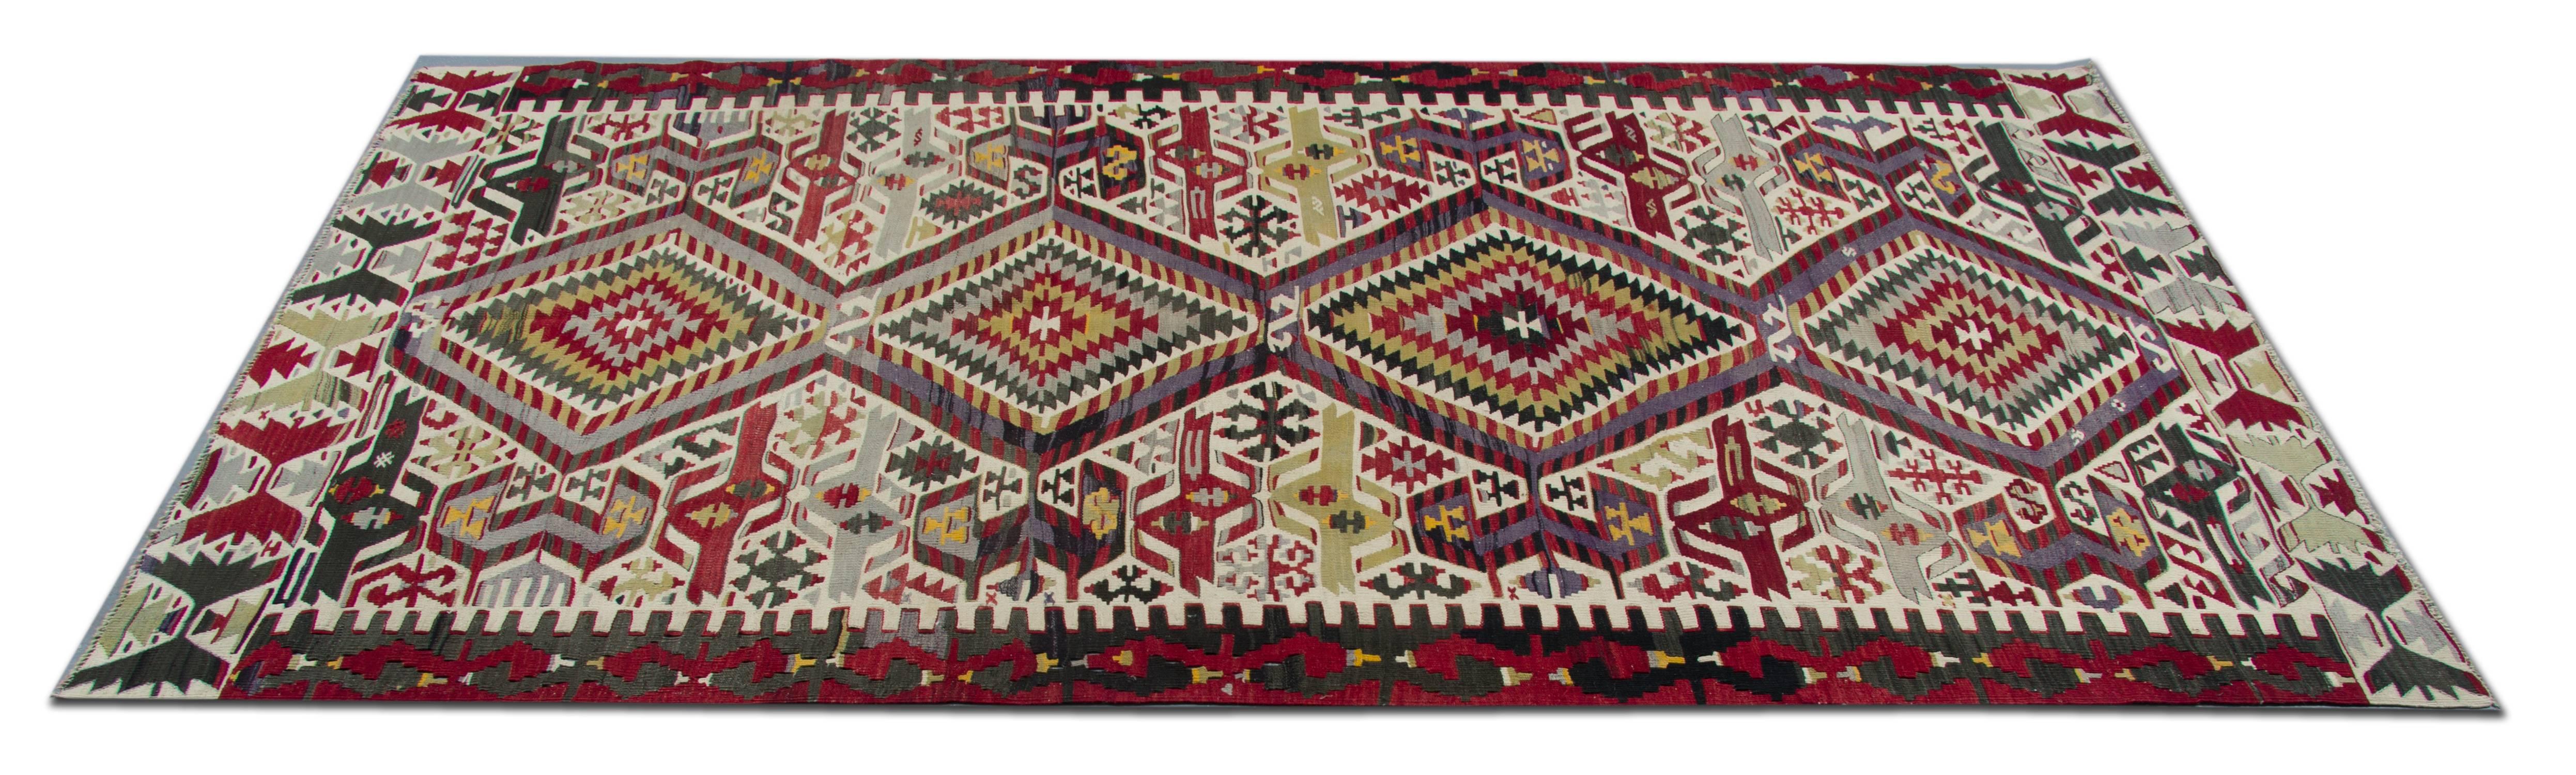 This handmade carpet Turkish rug is antique rug traditional handwoven runner rugs come from Turkey. The carpet design world. This kind of carpet runners is suitable for stair runners and hallway rugs. In a striking color combination of bright red,